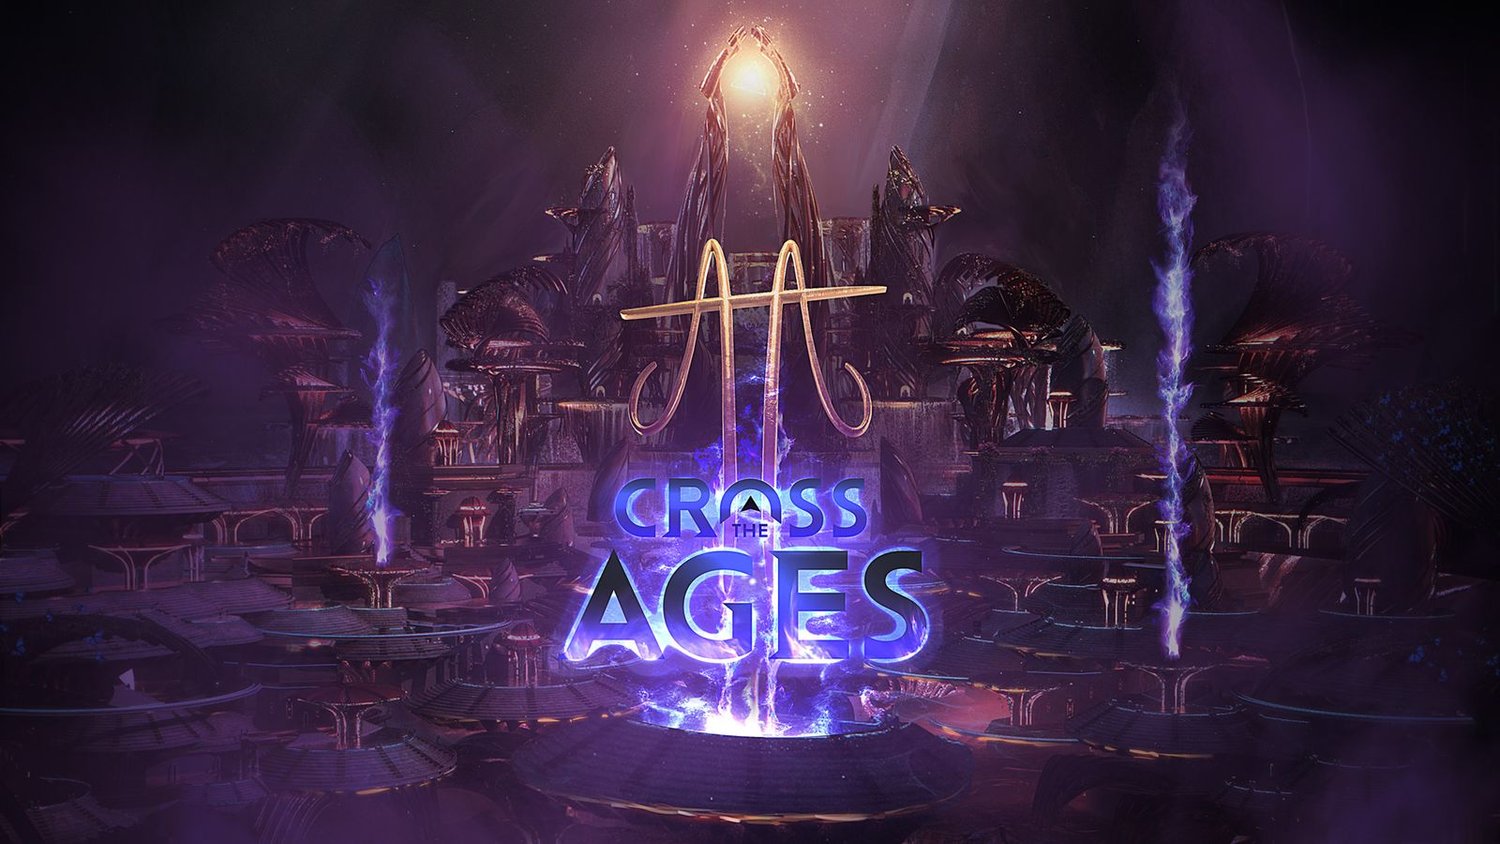 Cross the Ages